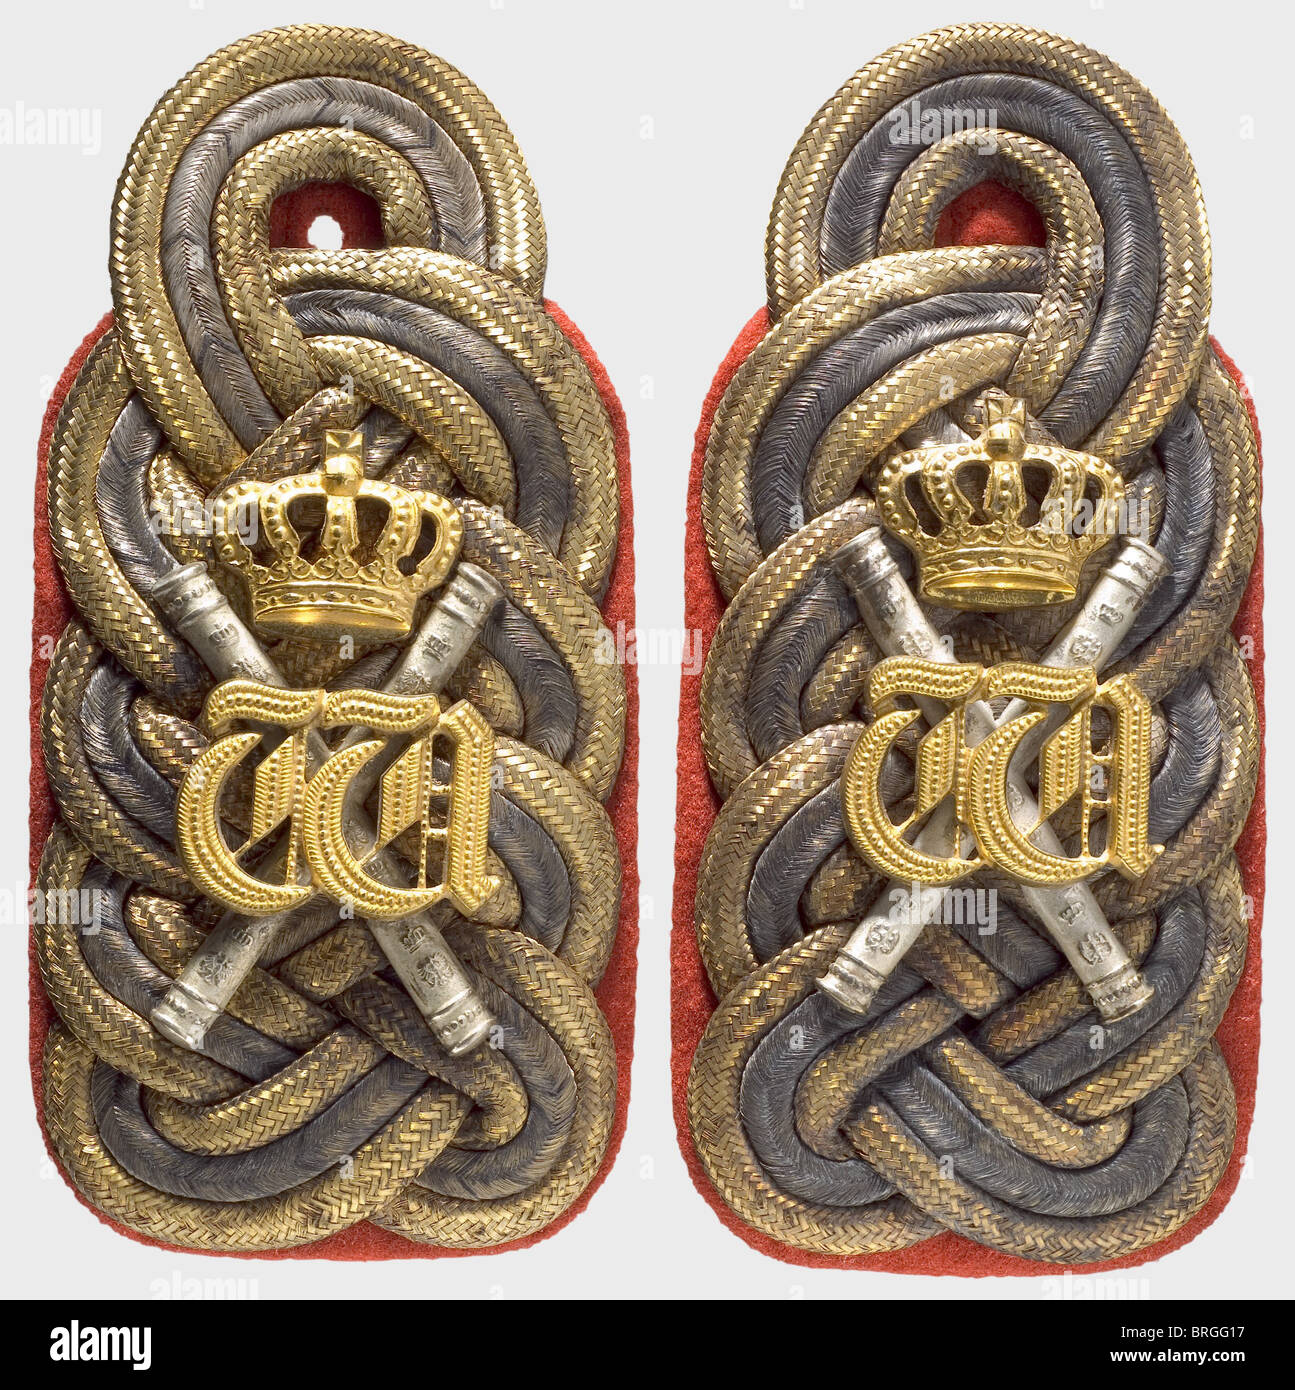 Kaiser Wilhelm II,model 1915 shoulder boards for his uniform as proprietor of the Hussar Life Guard Regiment Bright red cloth backing with a tongue to accept a sleeve.Braid from one silver and two golden flat cords,bearing silver marshal's batons below the gilded crowned cipher of Wilhelm I,which Wilhelm II wore as former adjutant to his grandfather.The braid is darkened in places.The shoulder boards come from the contents of the house at Doorn.See the exhibition catalogue for 'Der letzte Kaiser,Wilhelm II.im Exil',DHM 1991,ill.p.340,Ser.No.607b,Additional-Rights-Clearences-Not Available Stock Photo